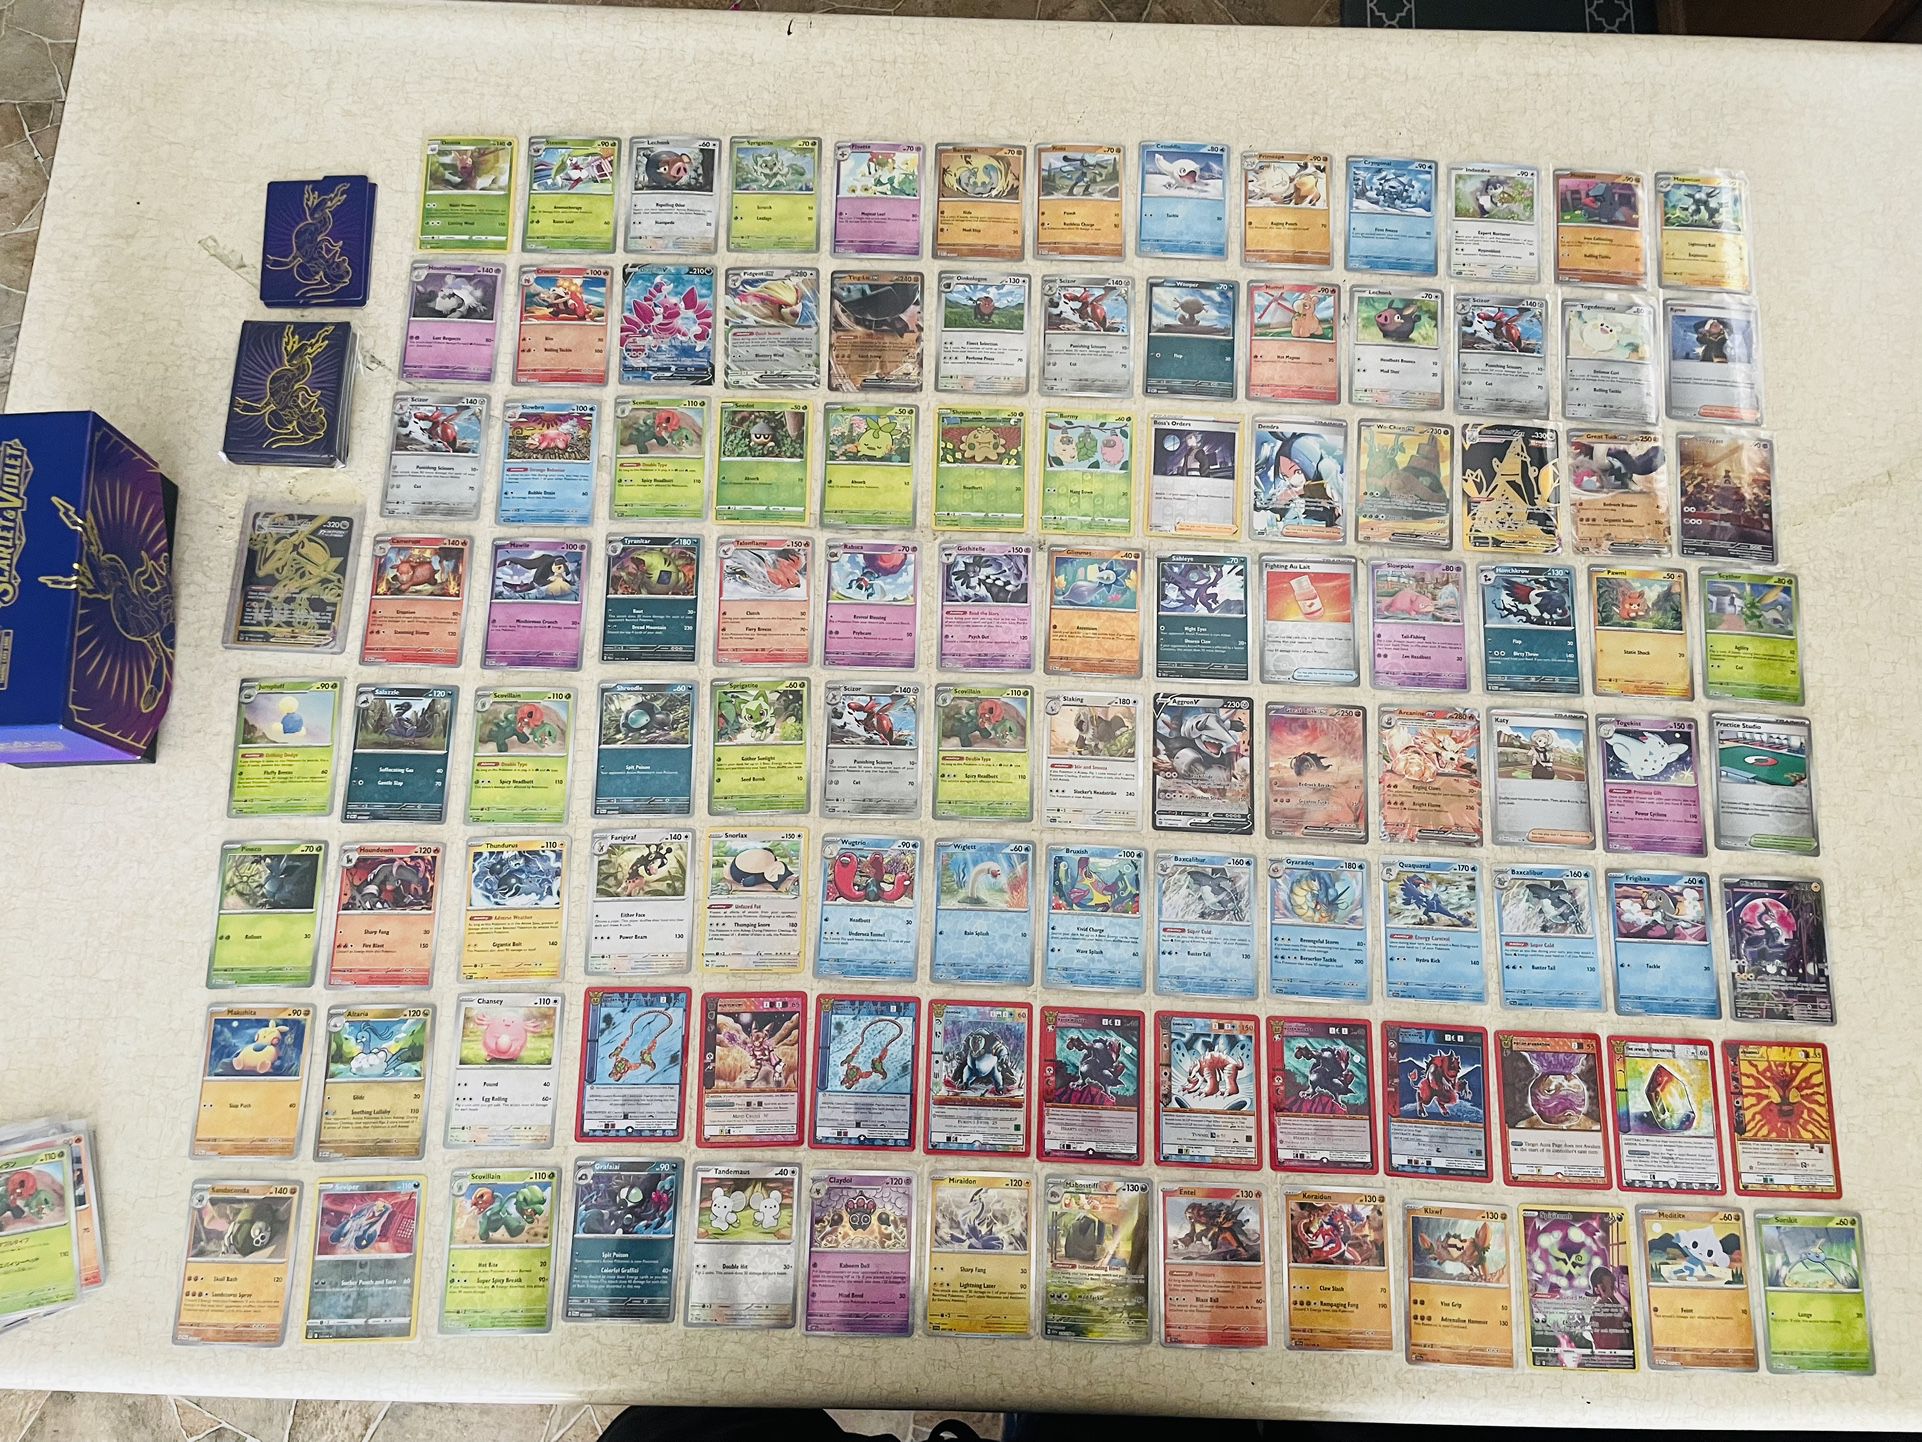 124 Pokémon Foil Trading Cards With 100 Extra Sleeves & Box